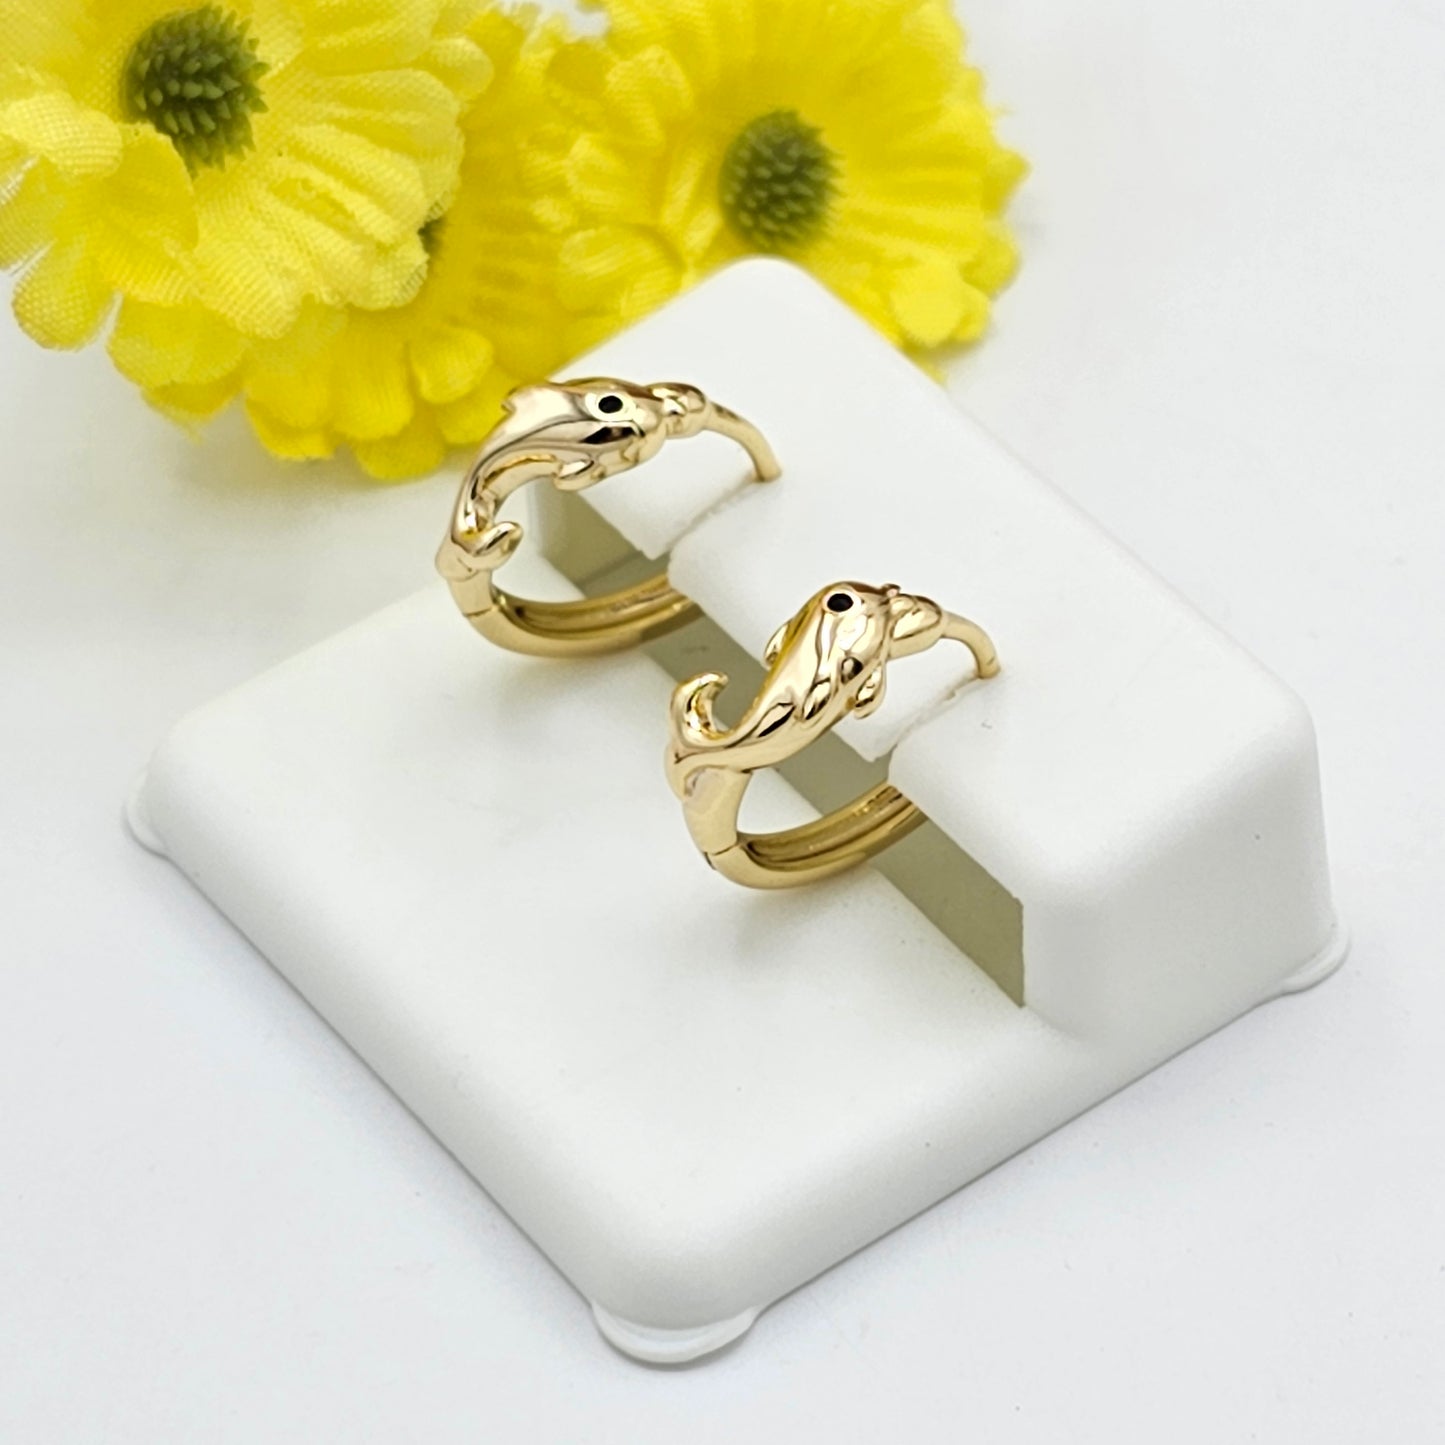 Earrings - 14K Gold Plated. Dolphin Continuous Hoops.